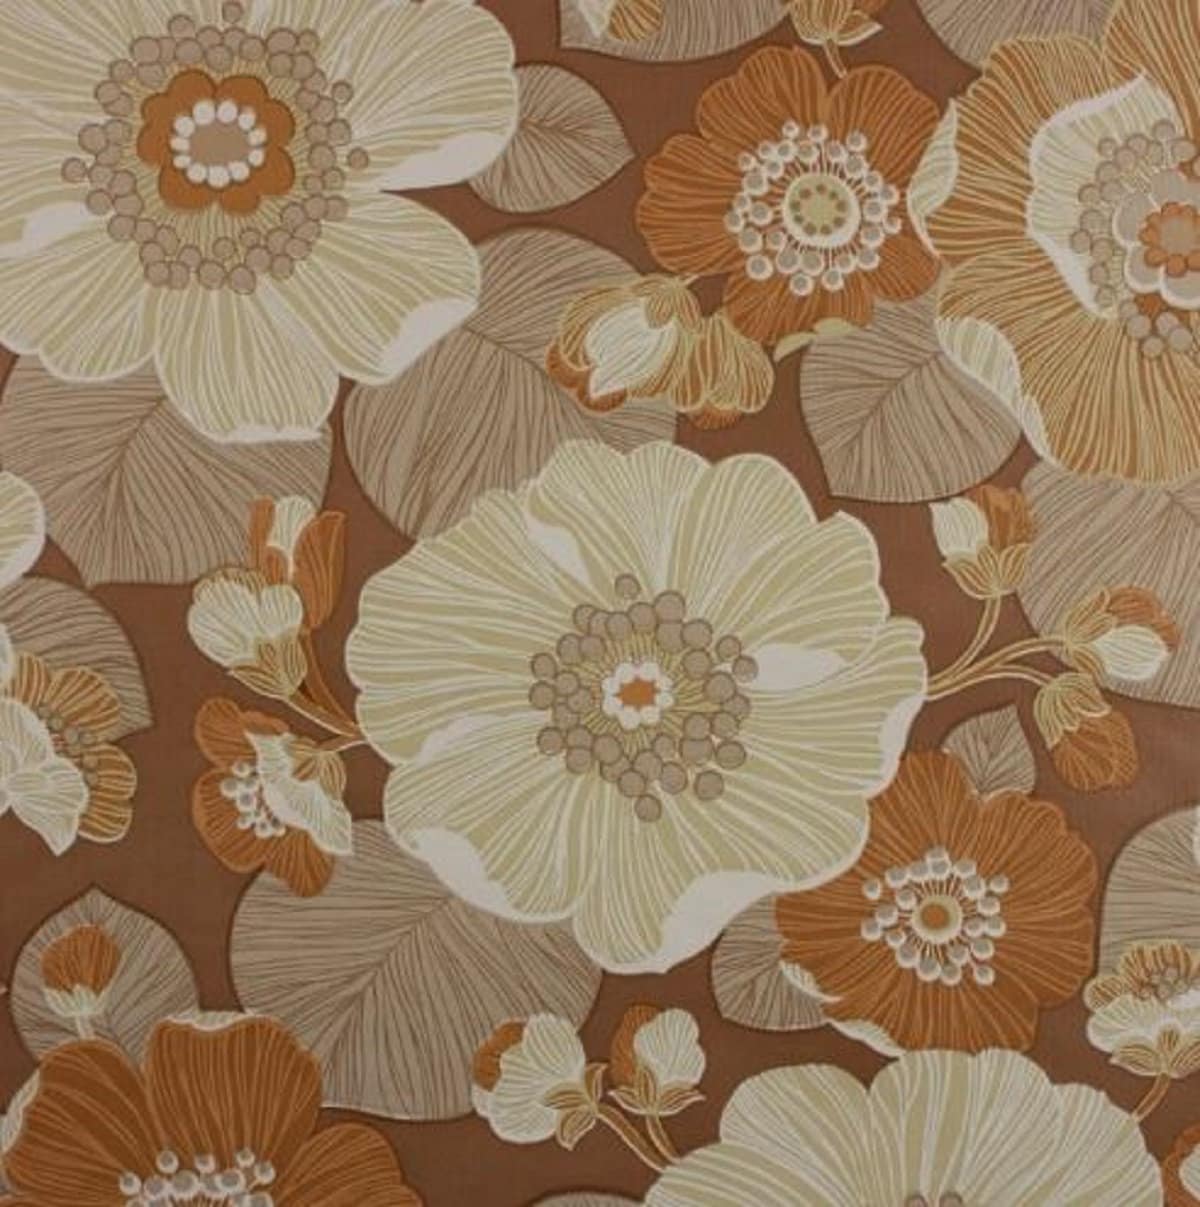 A brown and orange floral wallpaper - 60s, 70s